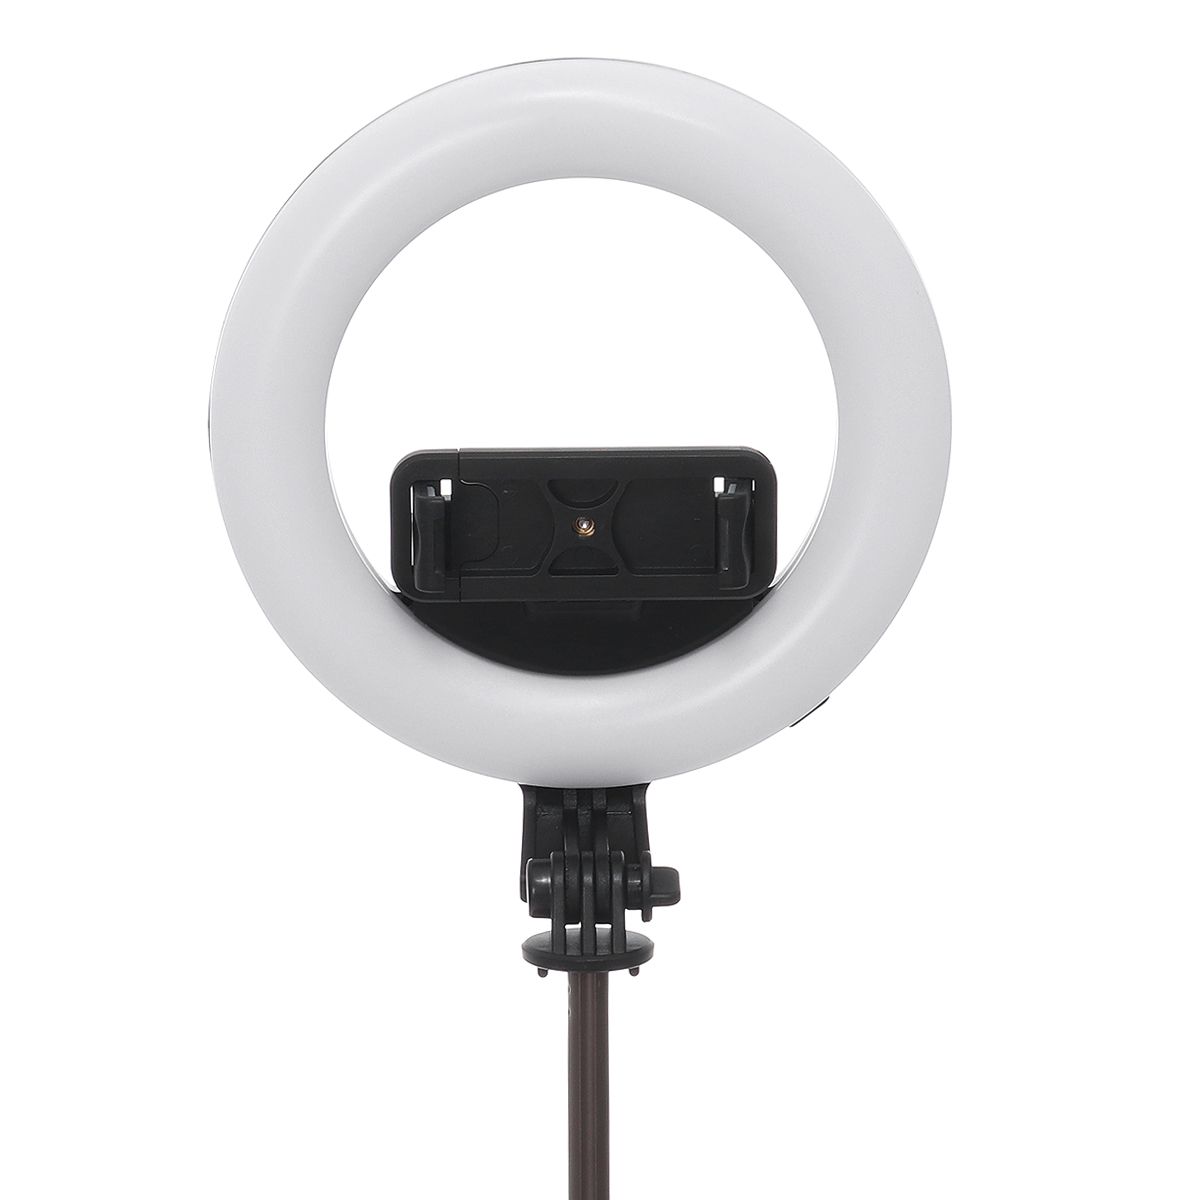 LED-Selfie-Ring-Light-Dimmable-Lamp-for-Camera-Phone-Video-Photo-LED-Fill-Beauty-Light-For-Live-YouT-1748916